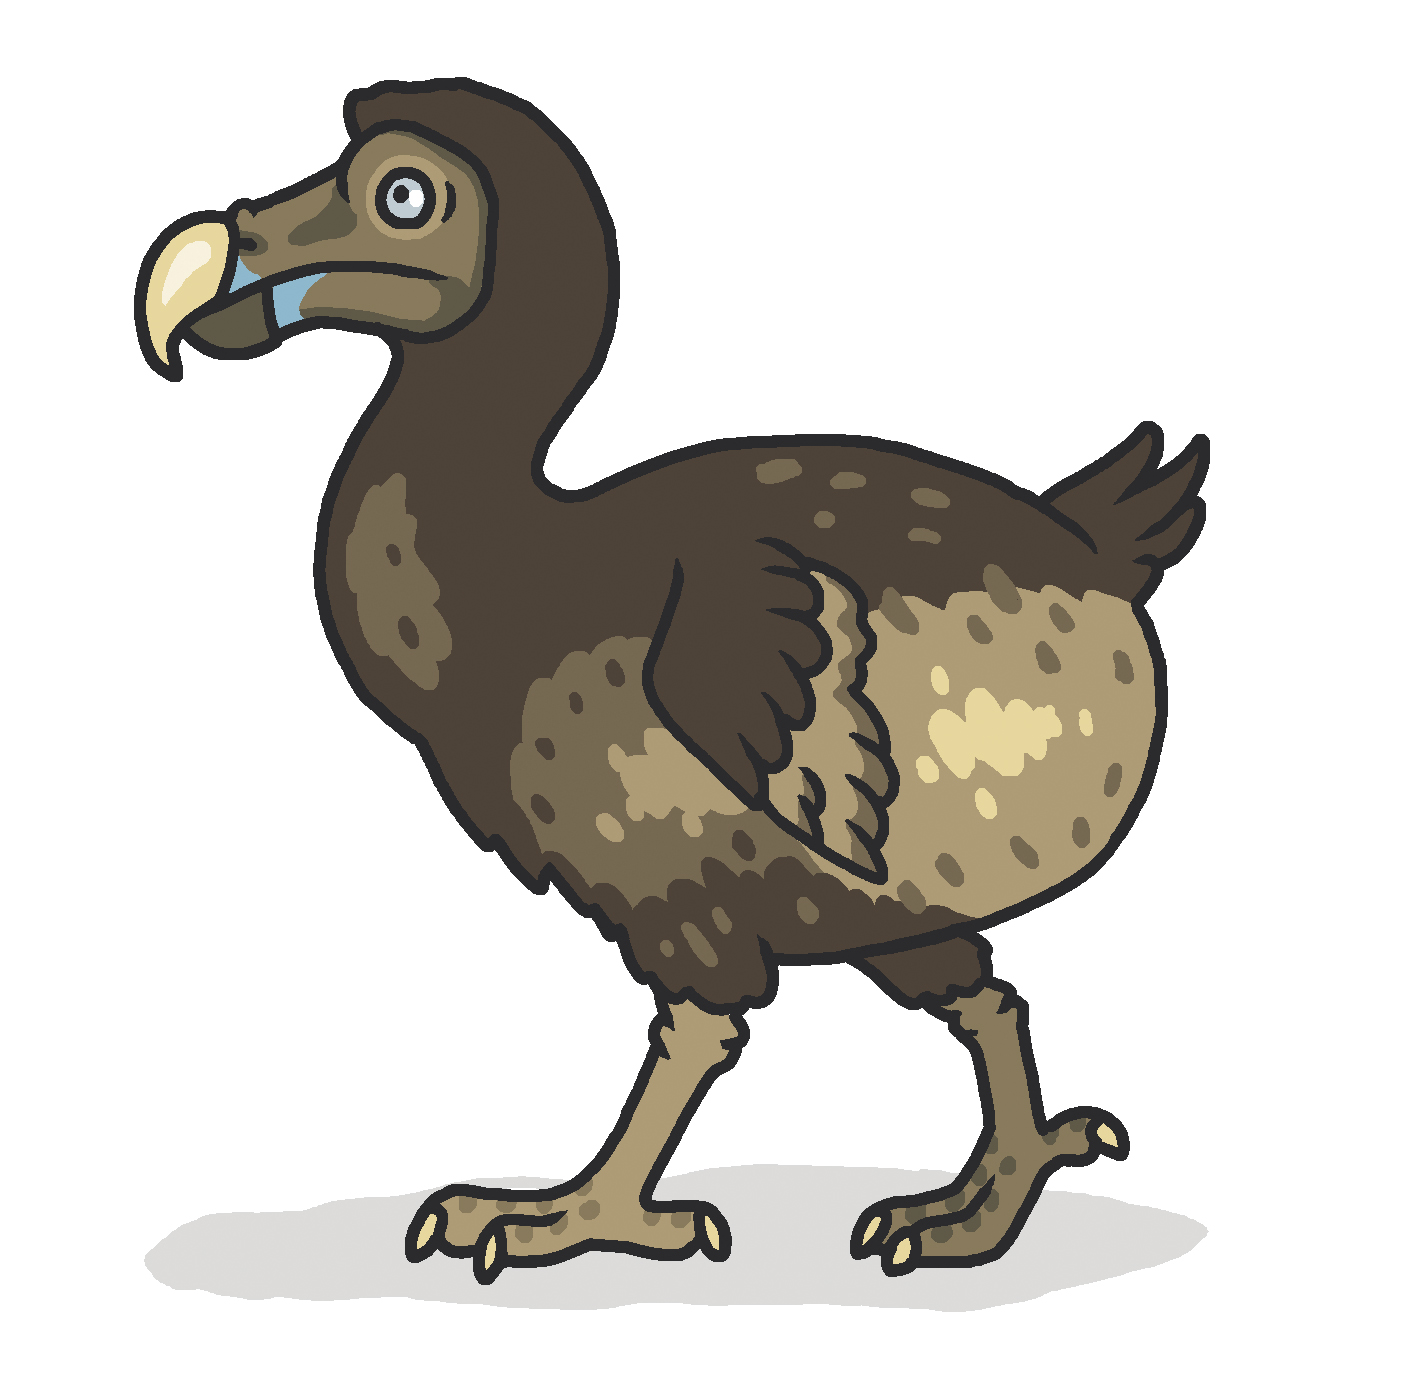 an illustration side view of a dodo. it is mostly shades of brown with a downward sloping beak